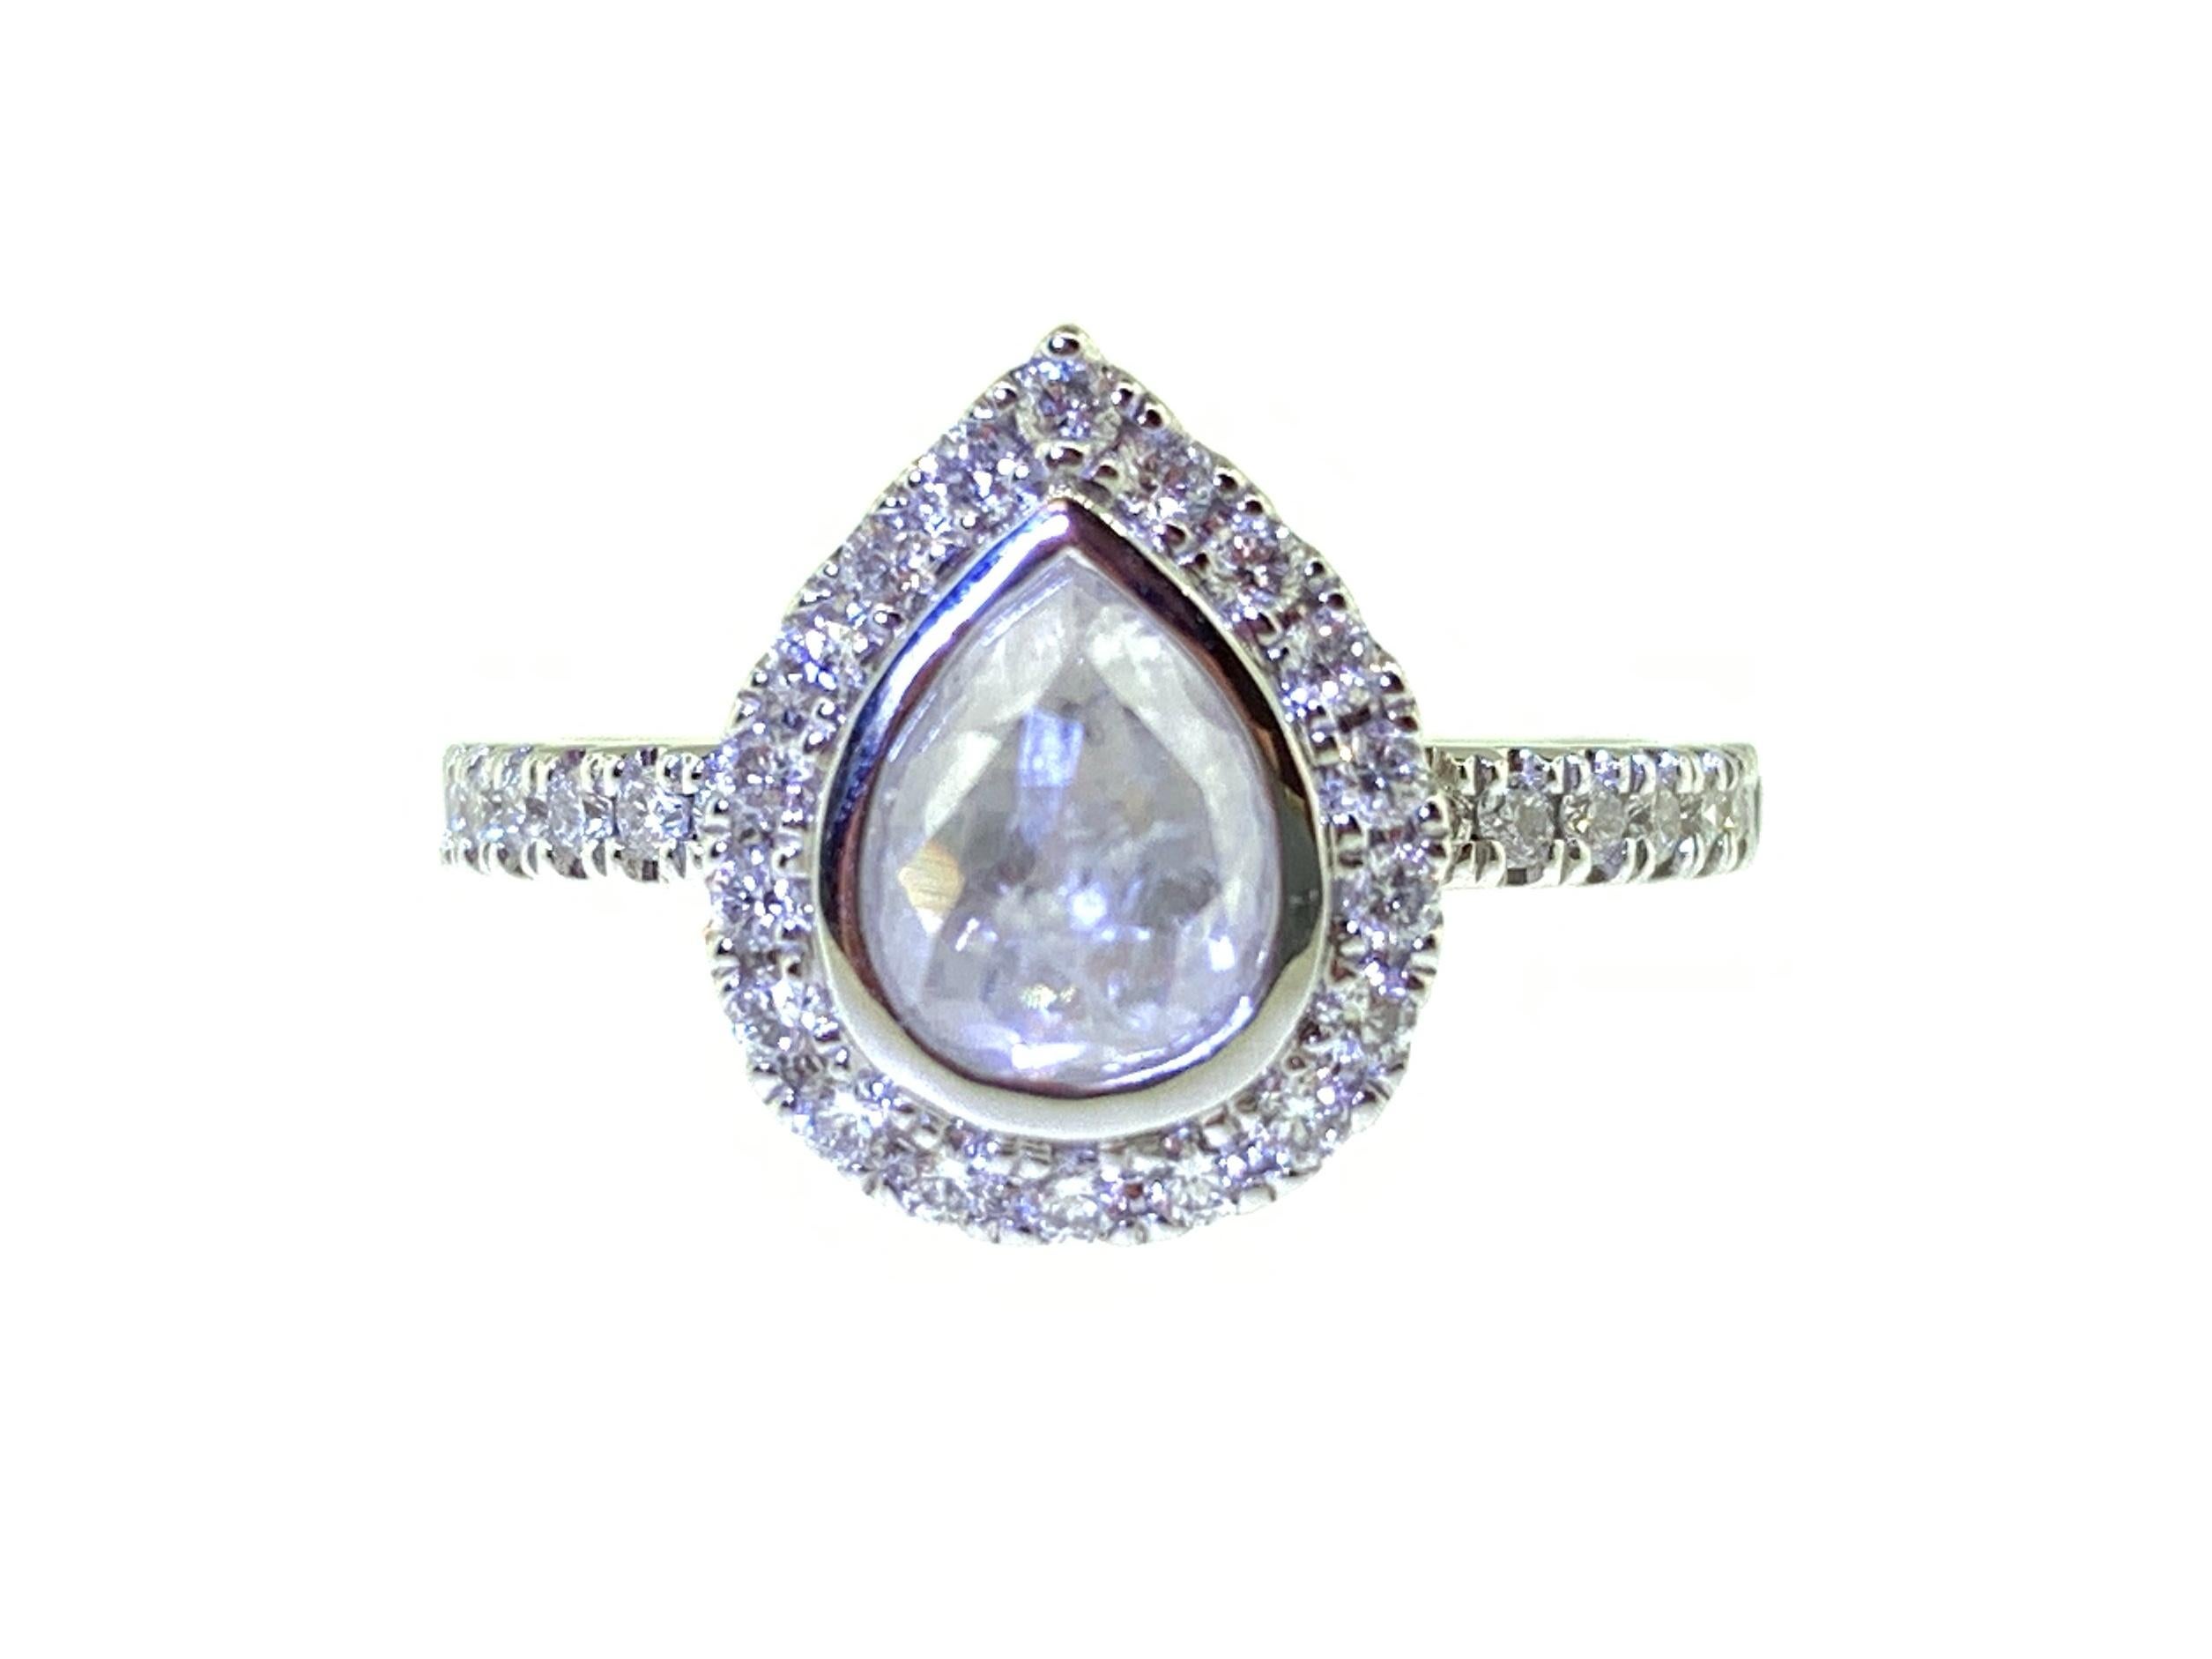 This stunning ring features a 0.78 Carat Rose Cut Pear Shape White Diamond with a Diamond Halo. This ring is set in 18k White Gold on a Diamond Shank. Total Diamond Weight (not including center stone) = 0.38 Carats. Ring Size = 6 1/2.